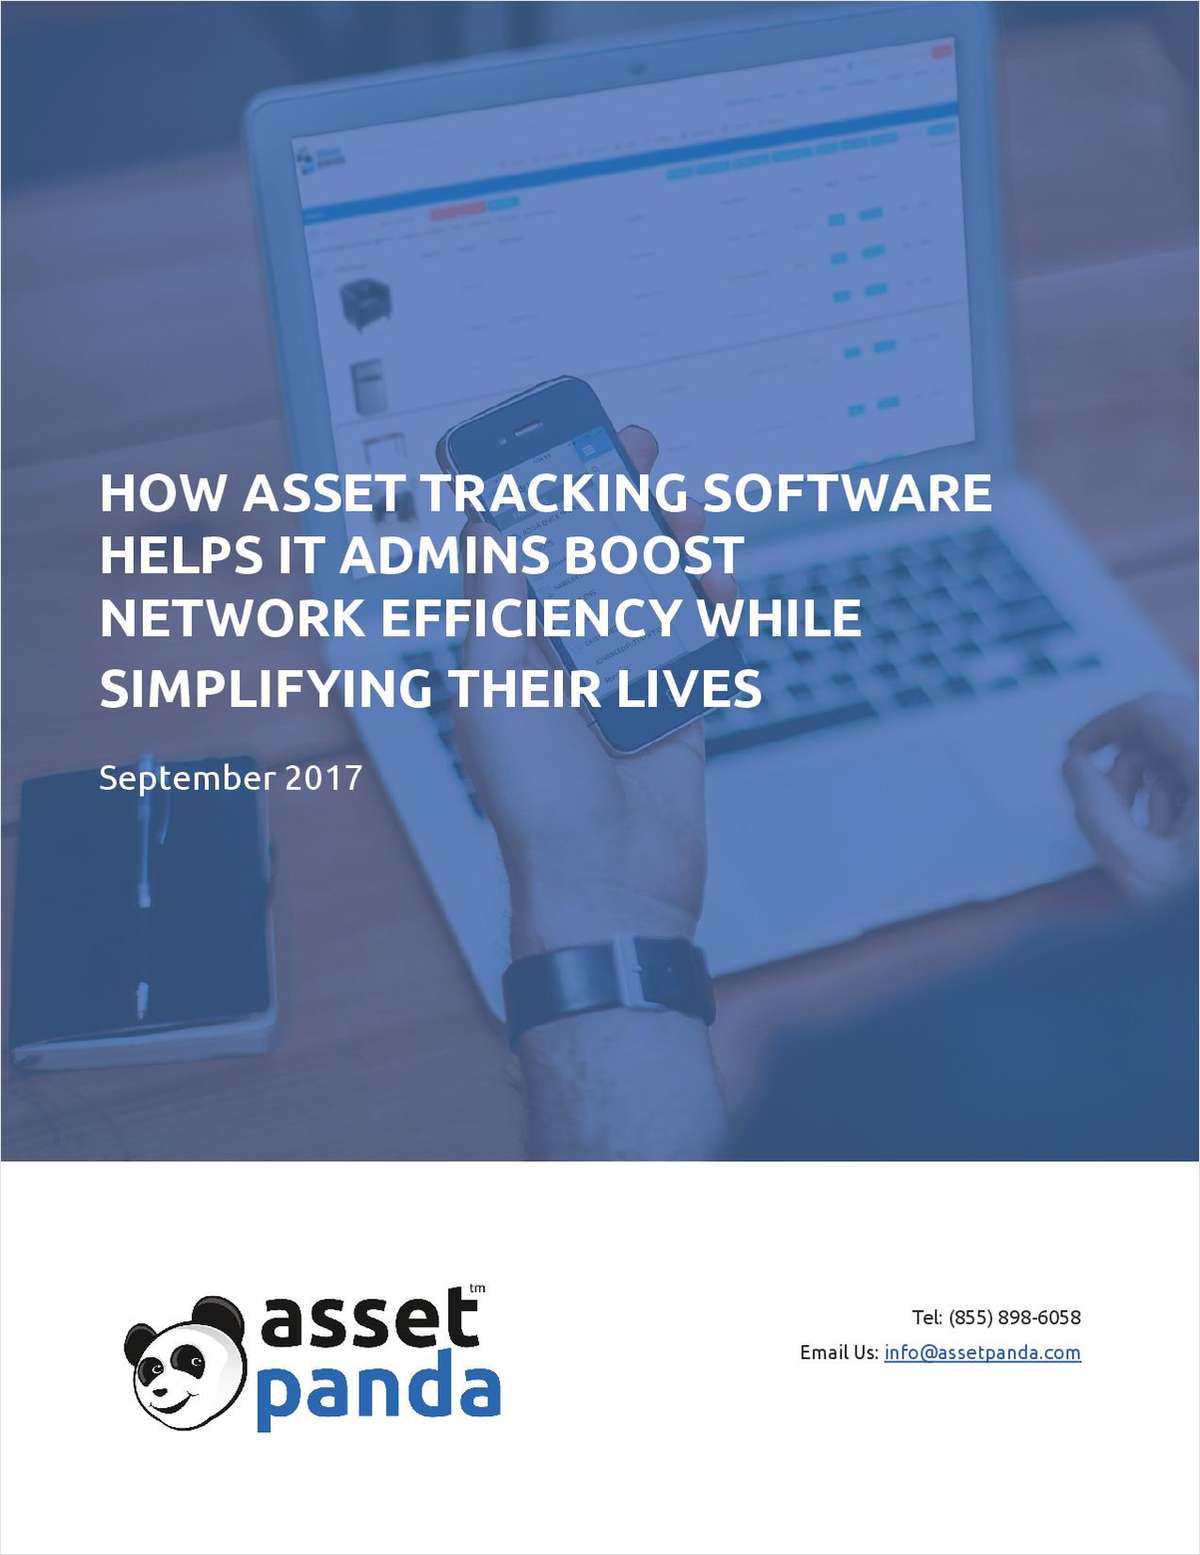 How Asset Tracking Software Helps IT Admins Boost Network Efficiency While Simplifying Their Lives